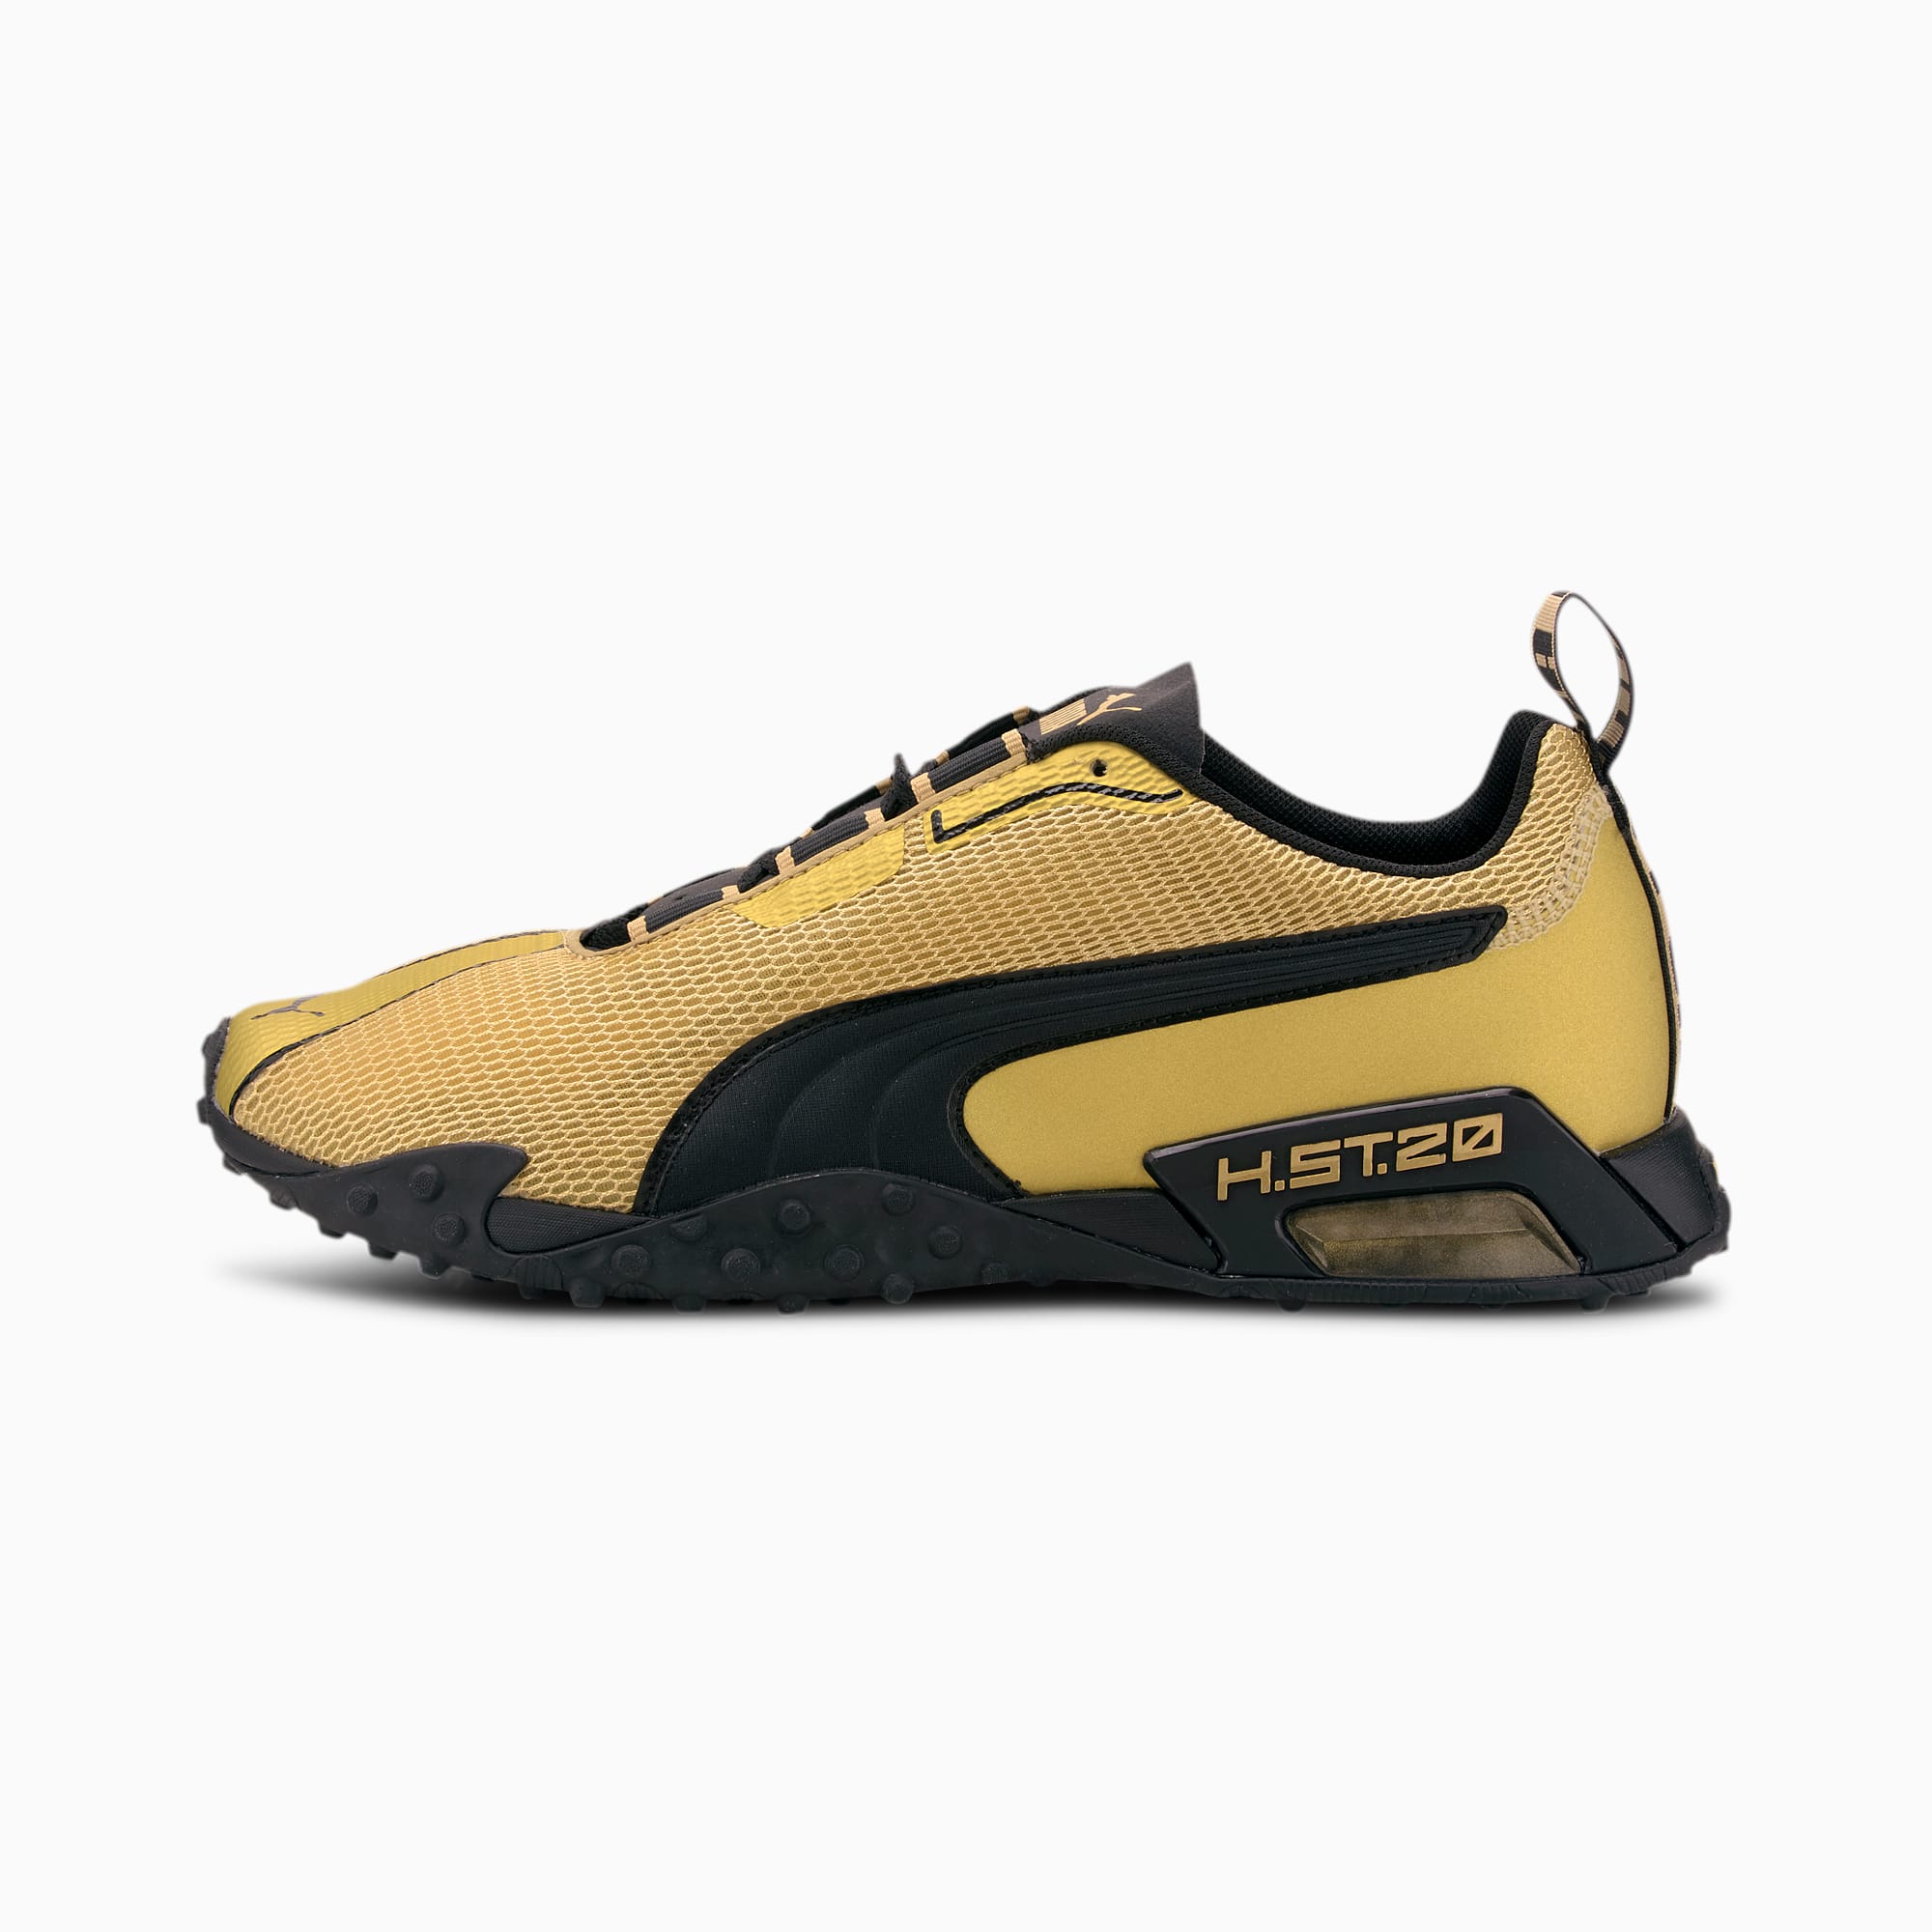 puma black and gold running shoes